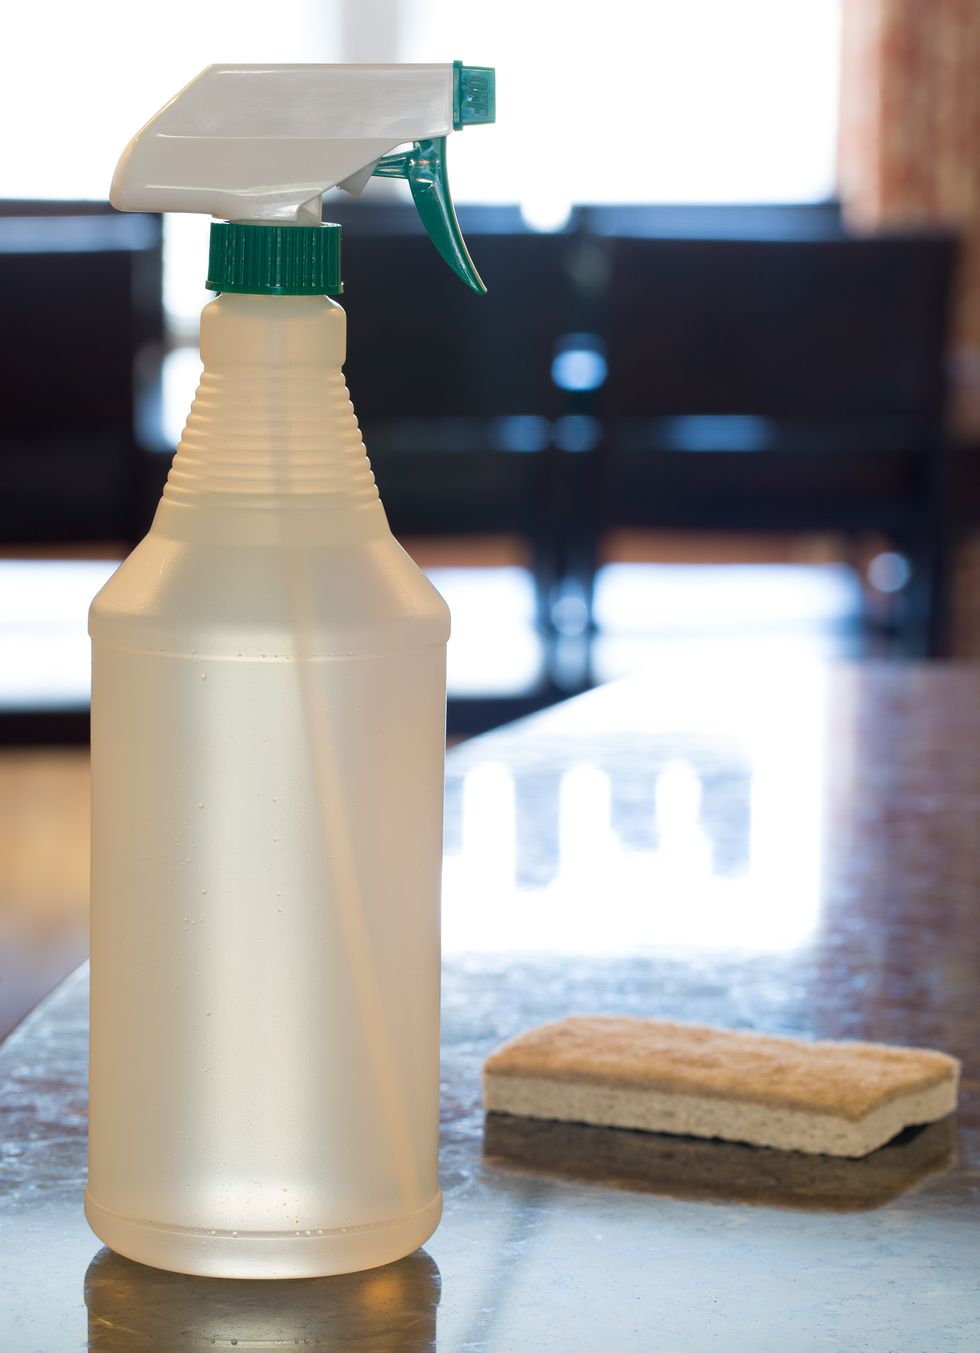 How to make homemade kitchen cleaners to reduce waste and cut costs - The  Washington Post